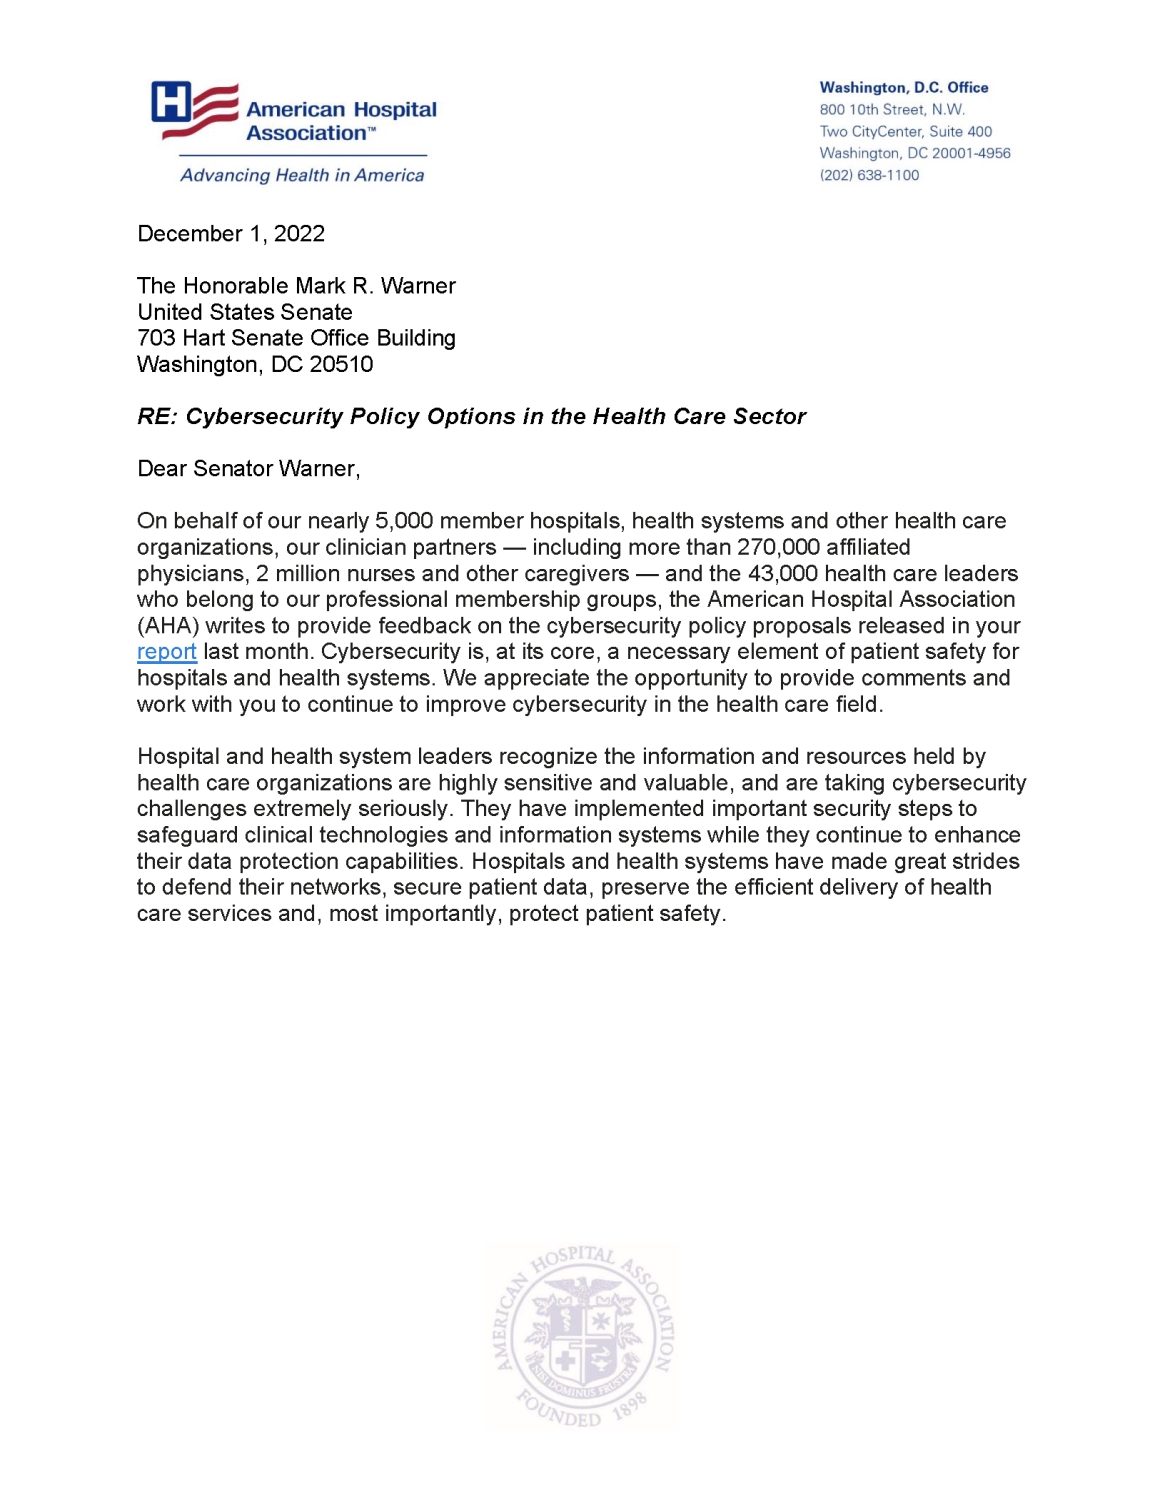 AHA Letter to Senator Warner on Cybersecurity Policy Options in the Health Care Sector page 1.